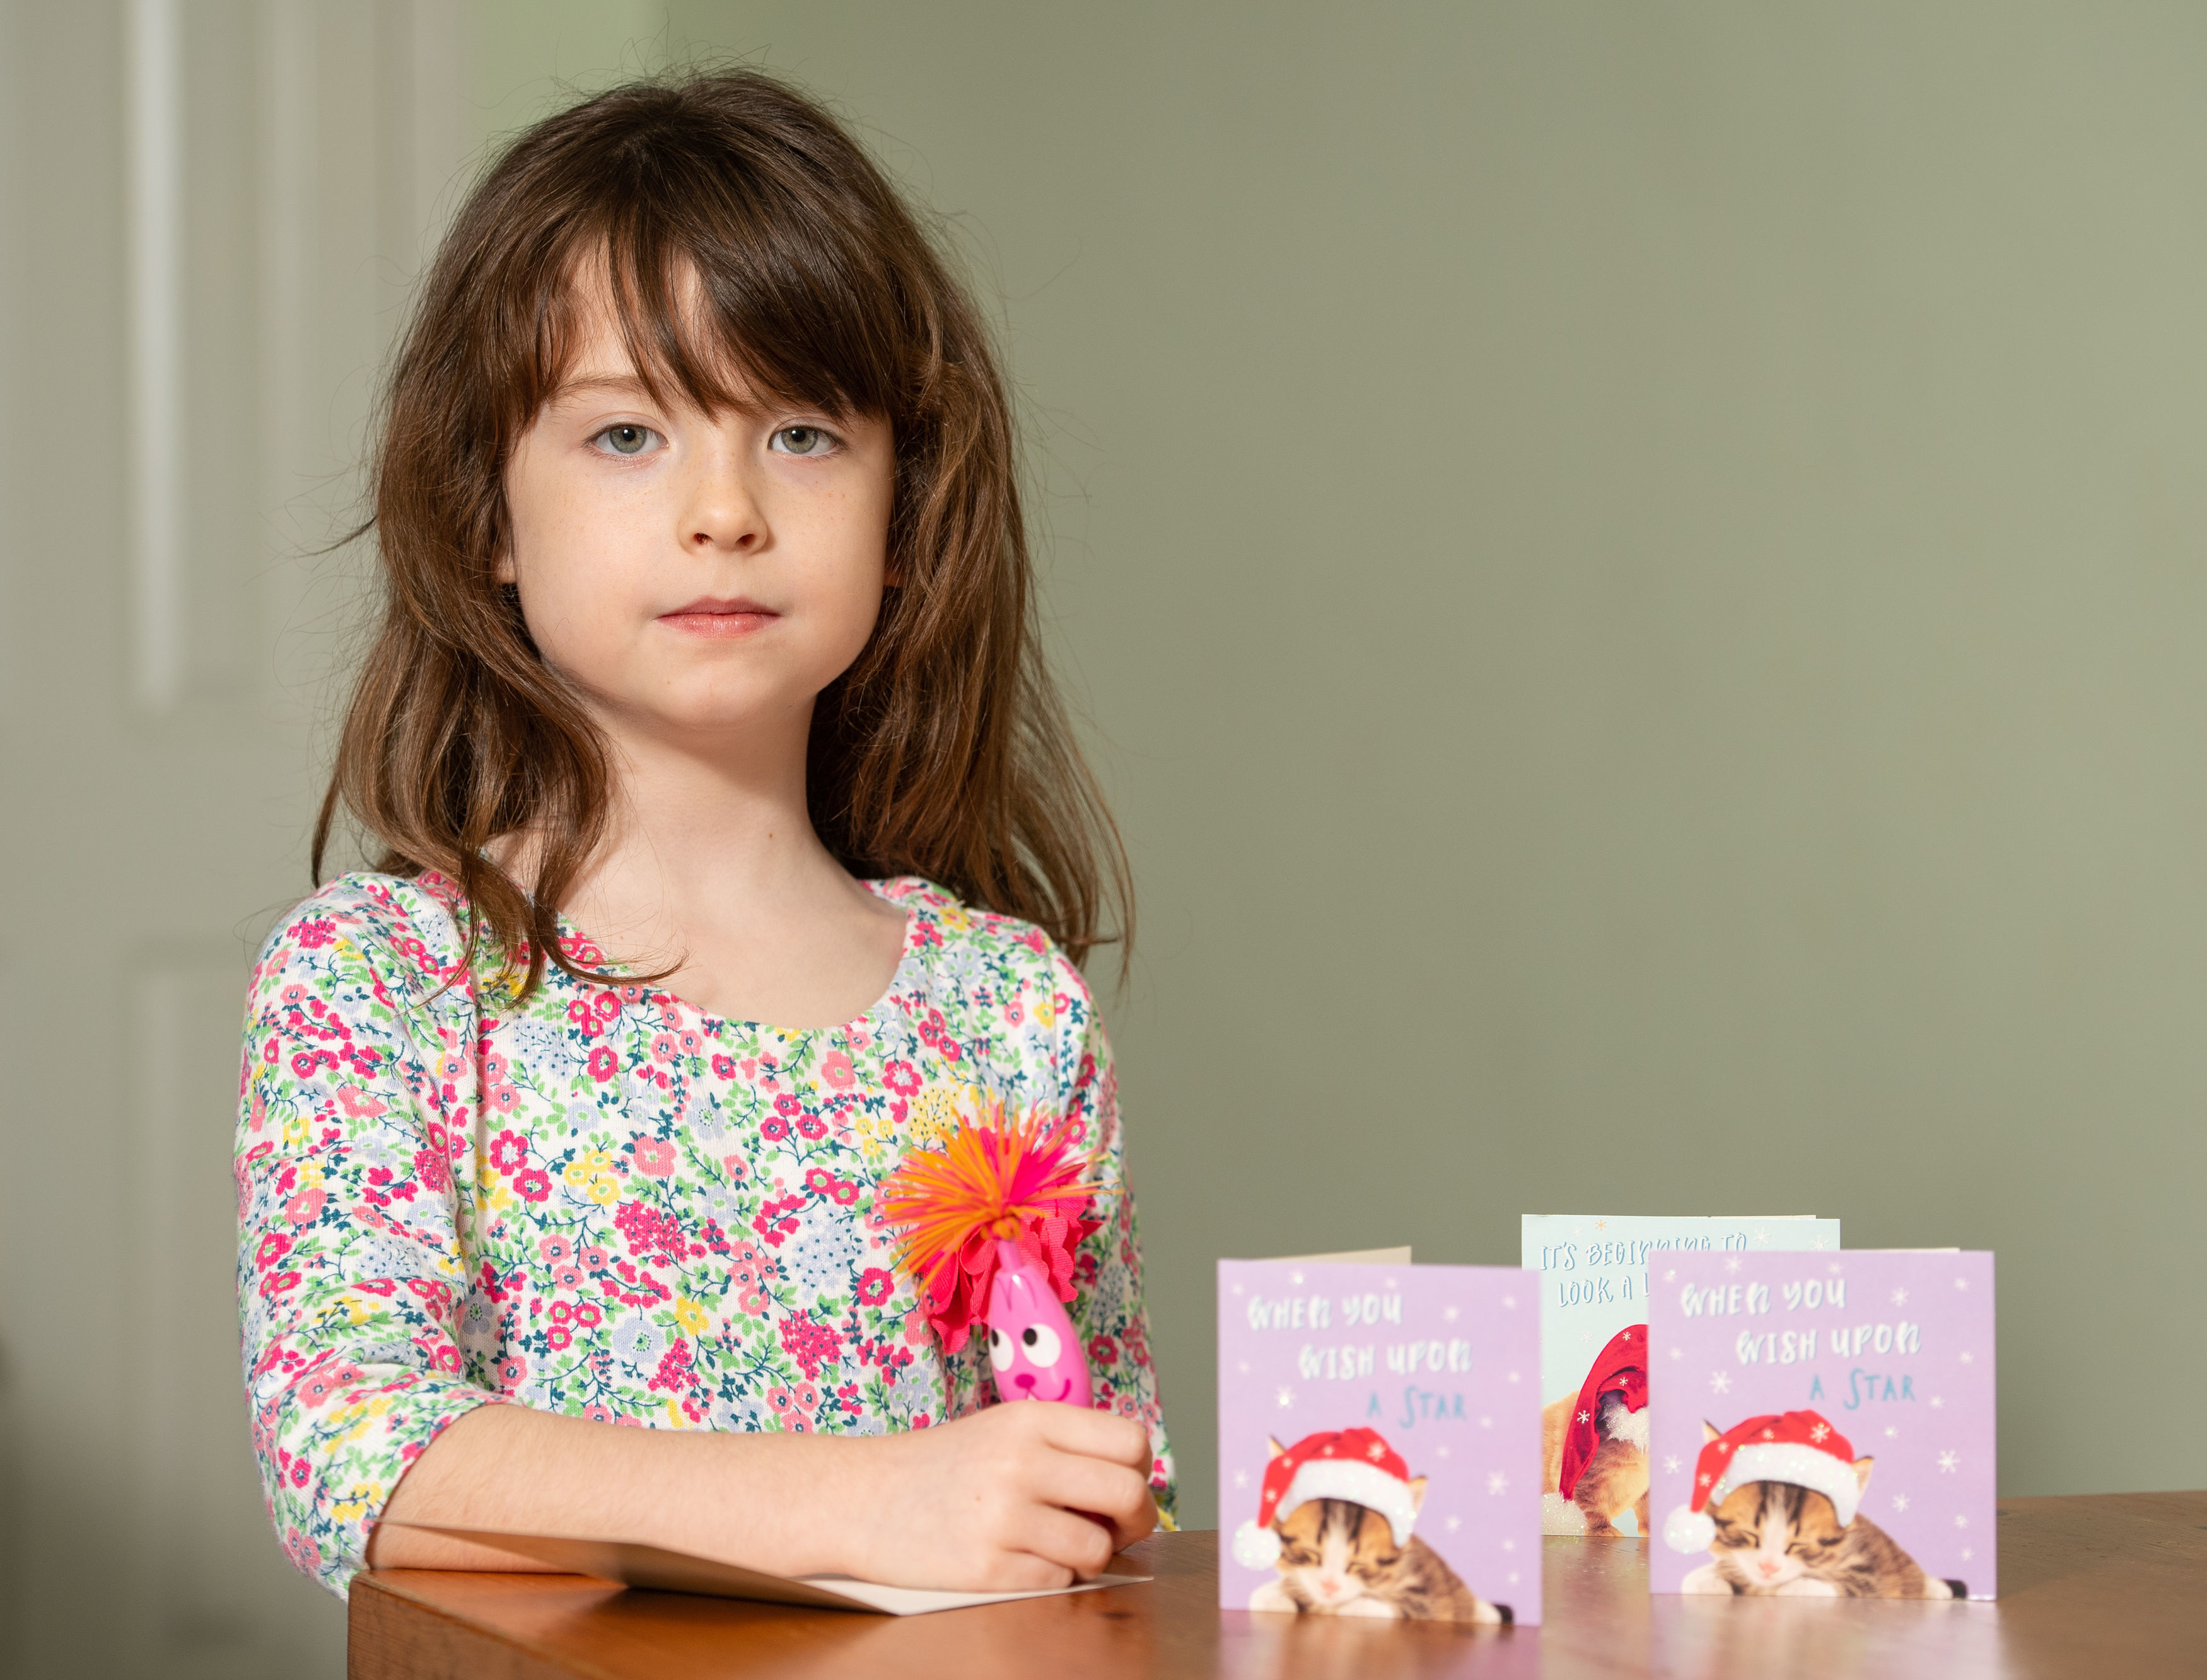 Six-year-old Florence Widdicombe, from Tooting, south London, was shocked after discovering a message in her Christmas card